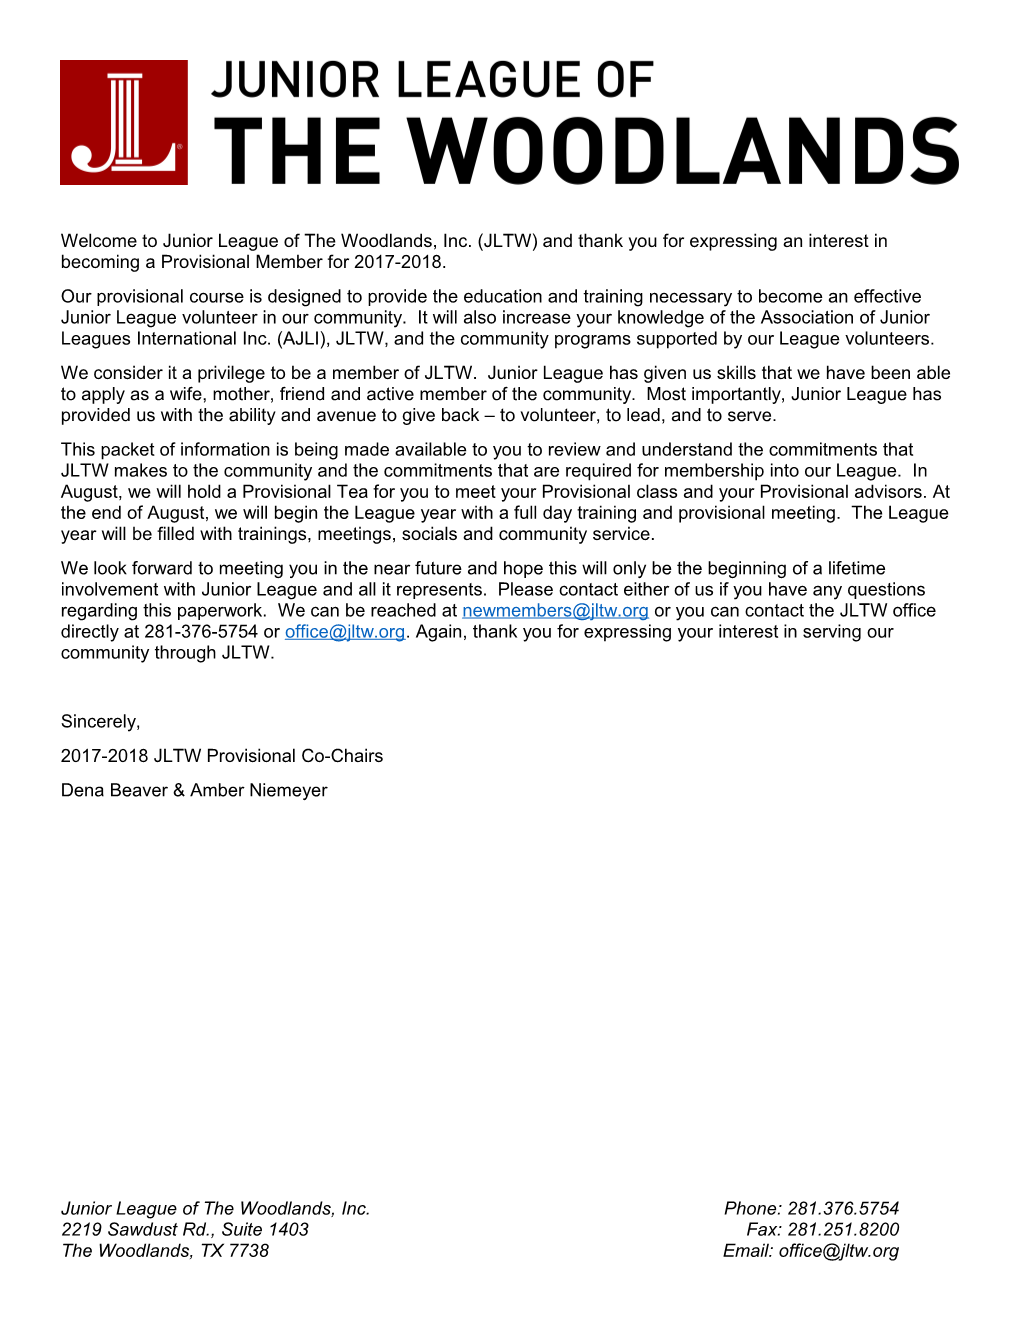 Welcome to Junior League of the Woodlands, Inc. (JLTW) and Thank You for Expressing An